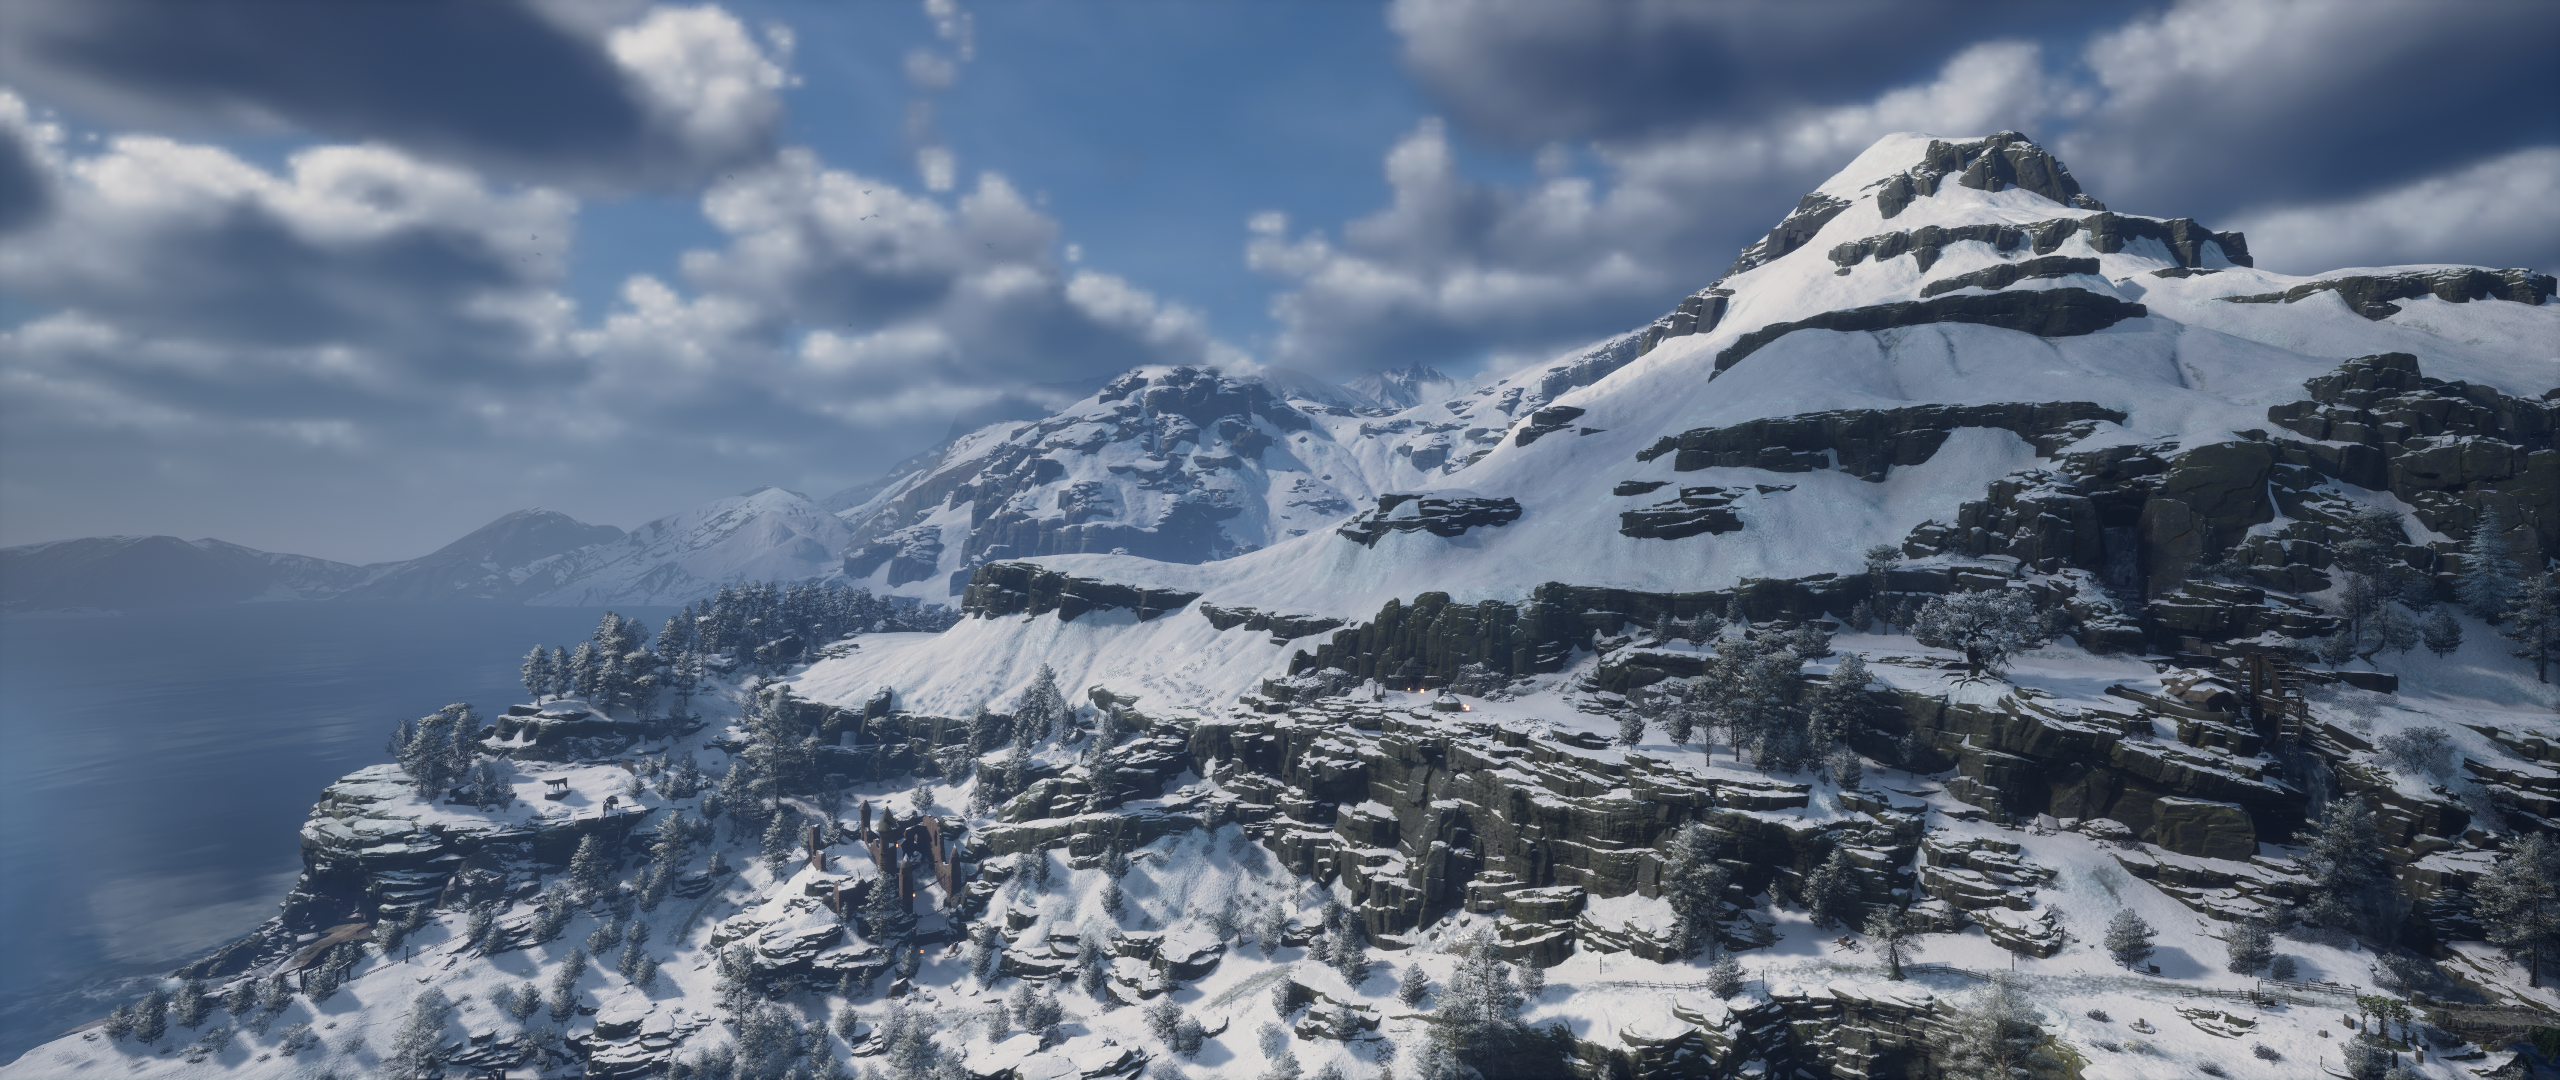 General 2560x1080 Hogwarts Hogwarts Legacy Harry Potter PC gaming landscape screen shot Avalanche Software snow clouds nature CGI video games